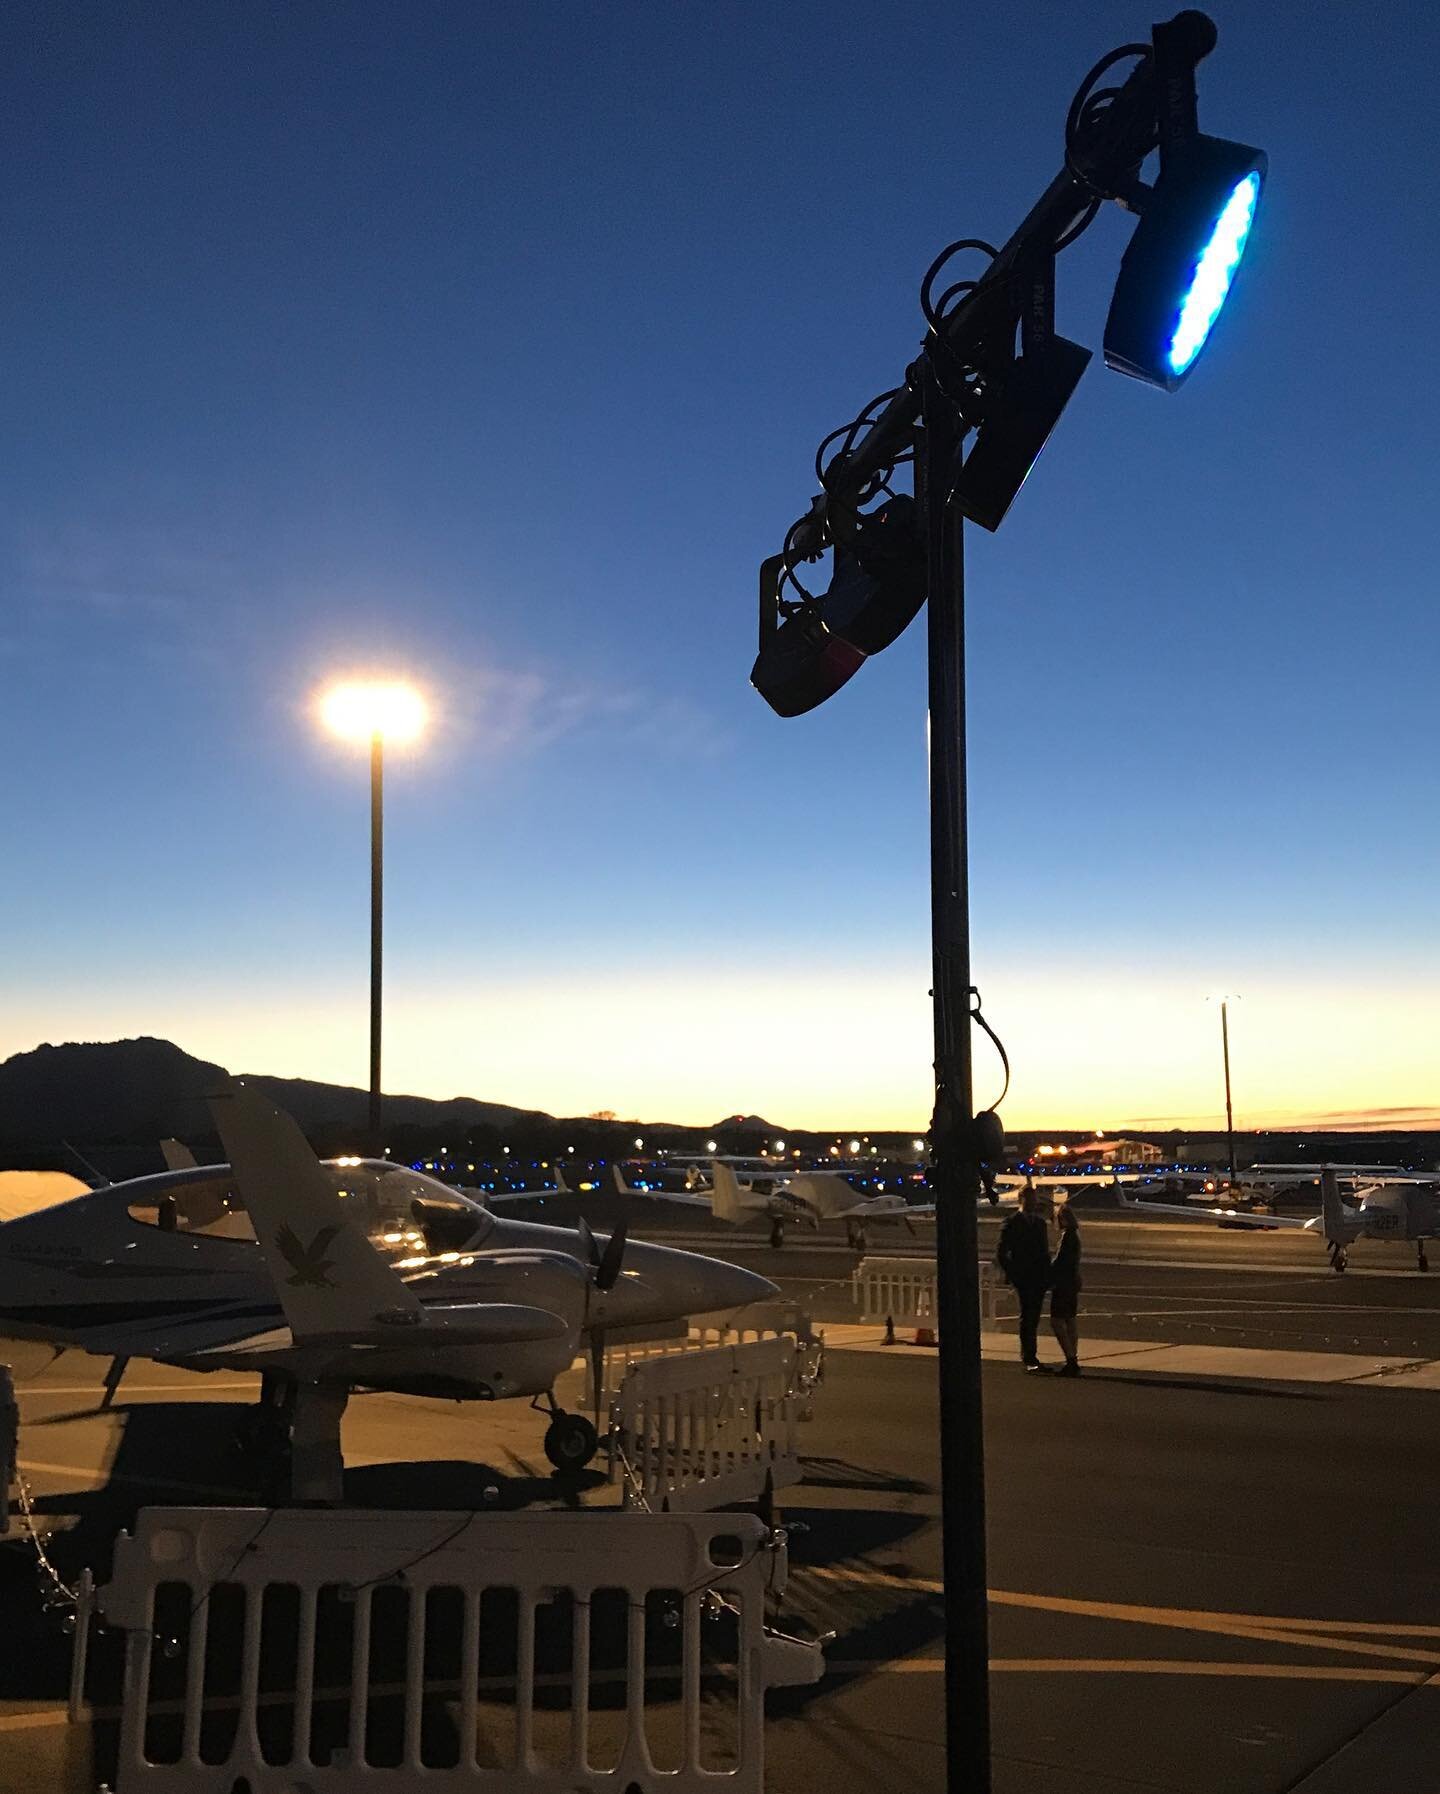 Dj on the tarmac ✅
Make the party fly ✅
Be fly at the party ✅

Great group of students from @embry_riddle_prescott 
Big thanks to @skycityproductions for the sound system! Sky and Todd, you rock 💥🔊 #bassonpoint